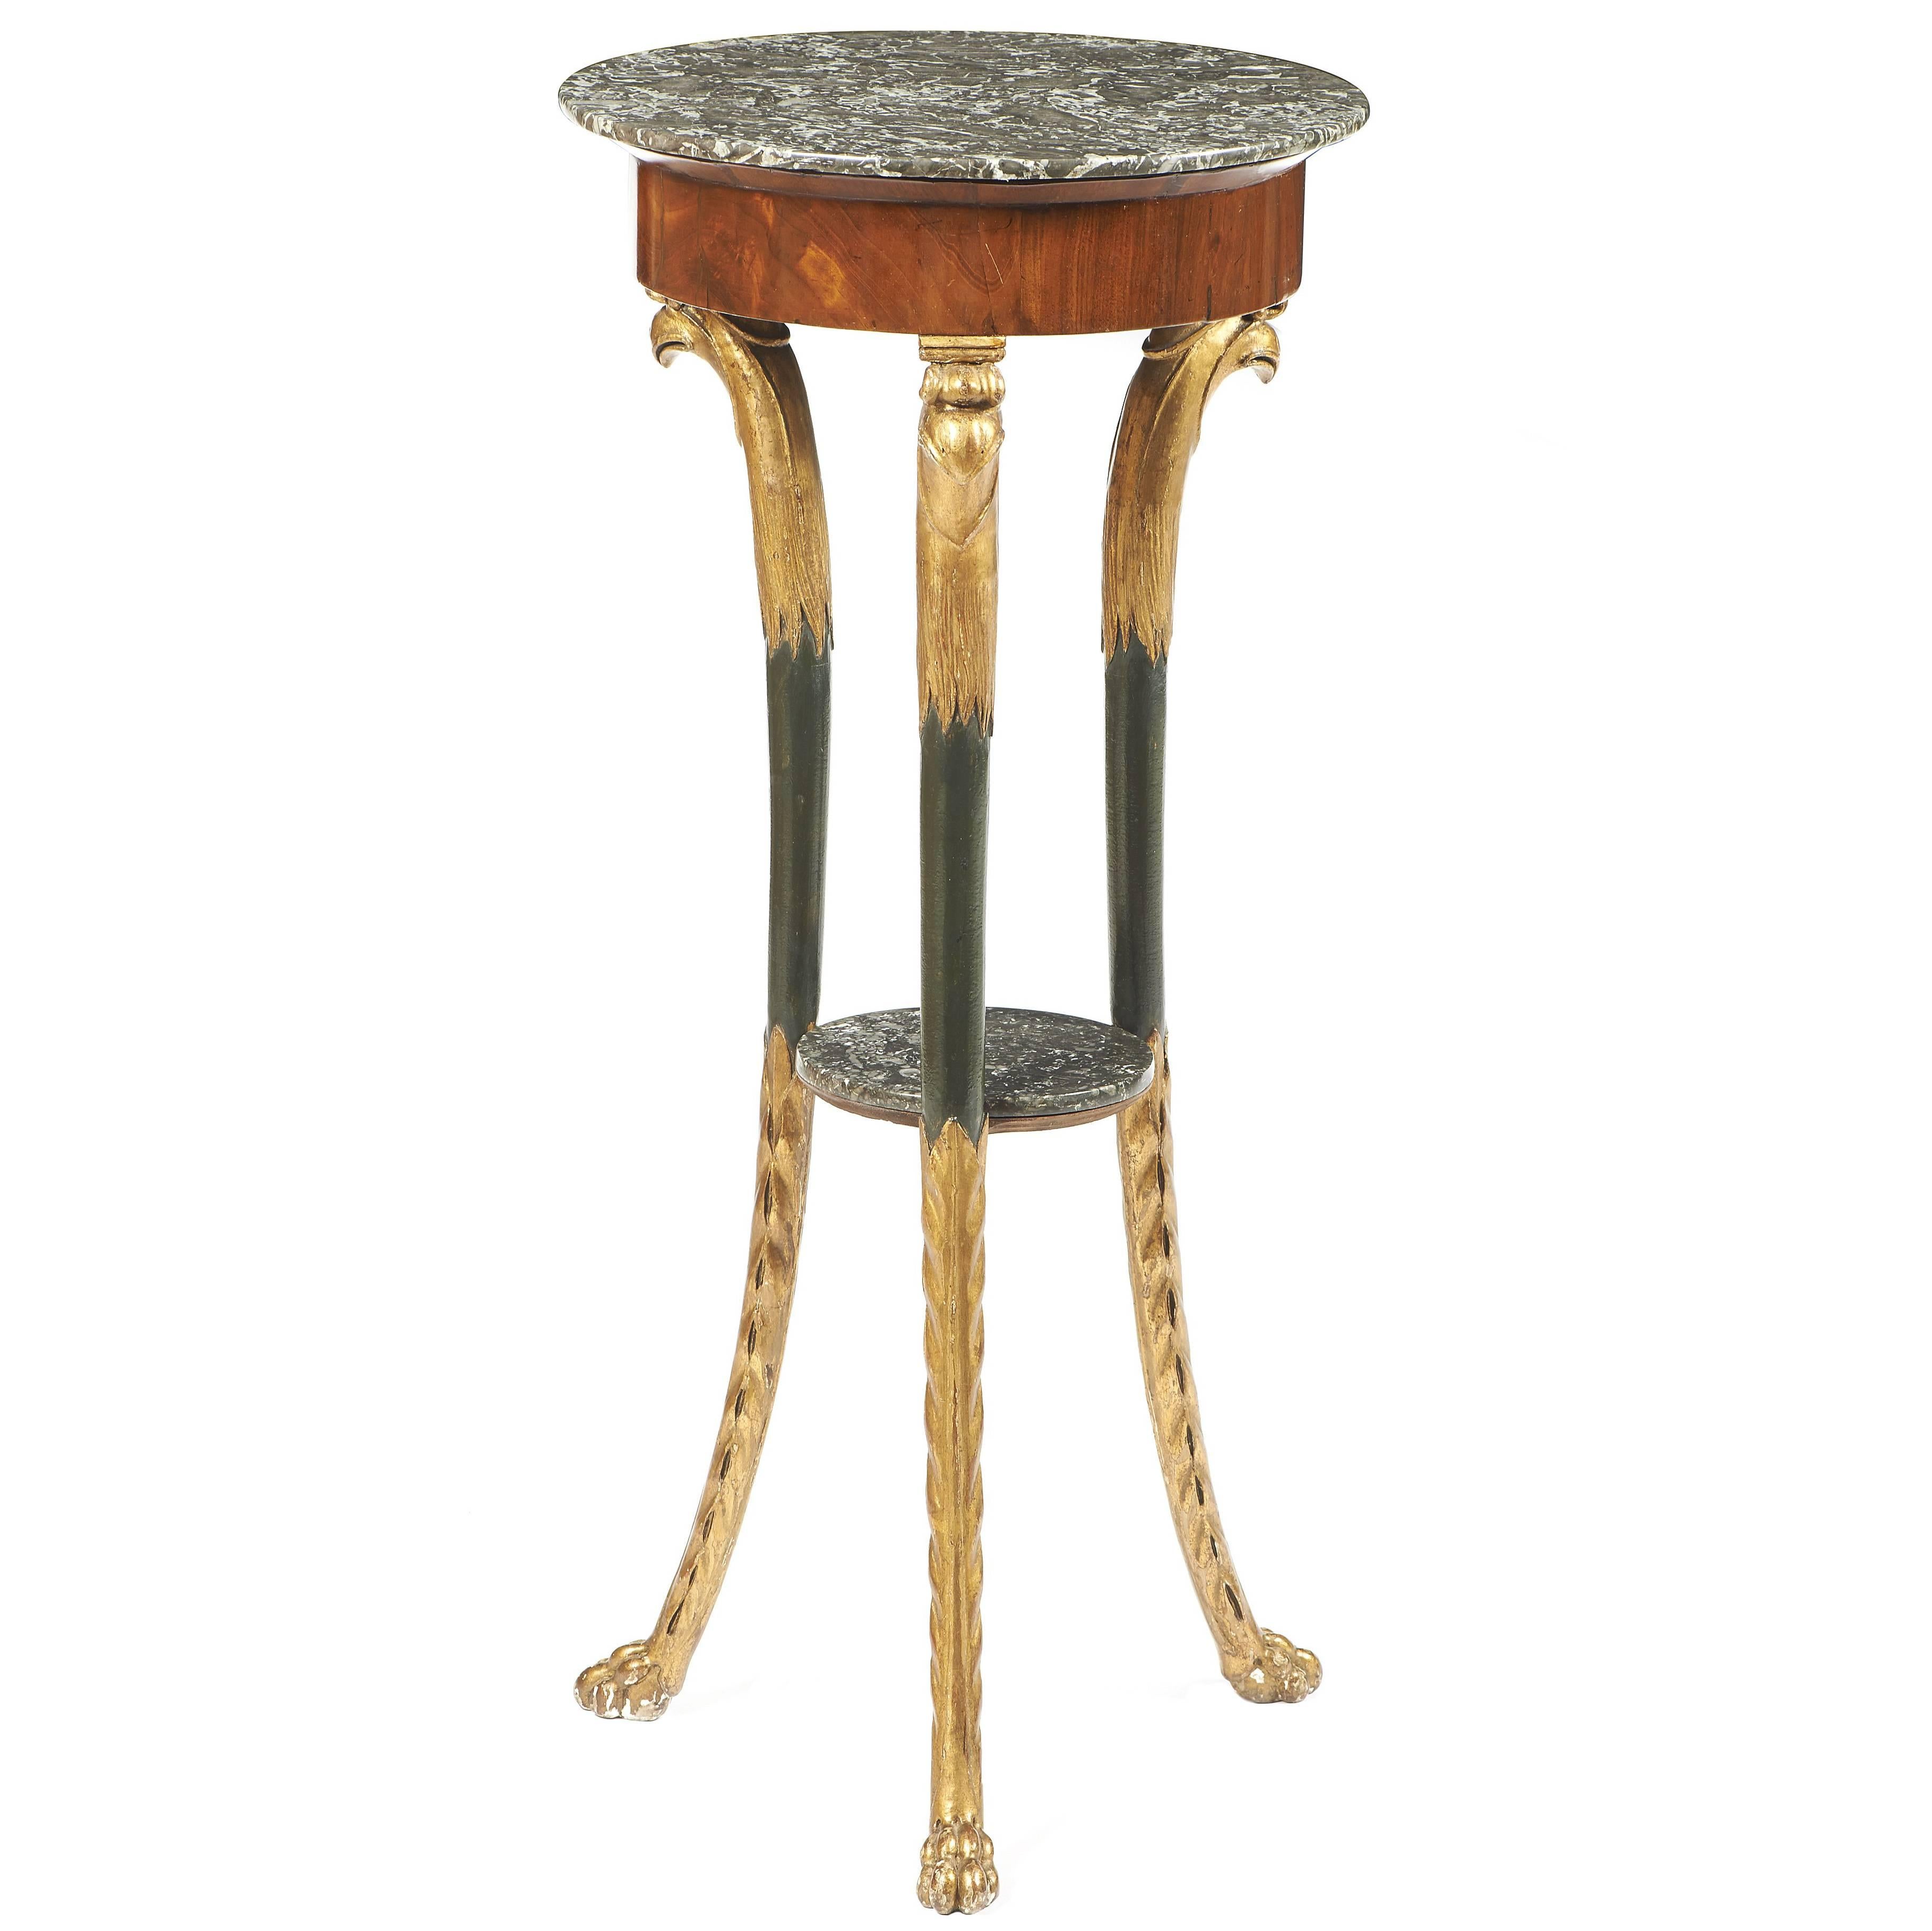 Empire Pedestal Table on Mahogany Ebonized and Giltwood with Black Marble Top